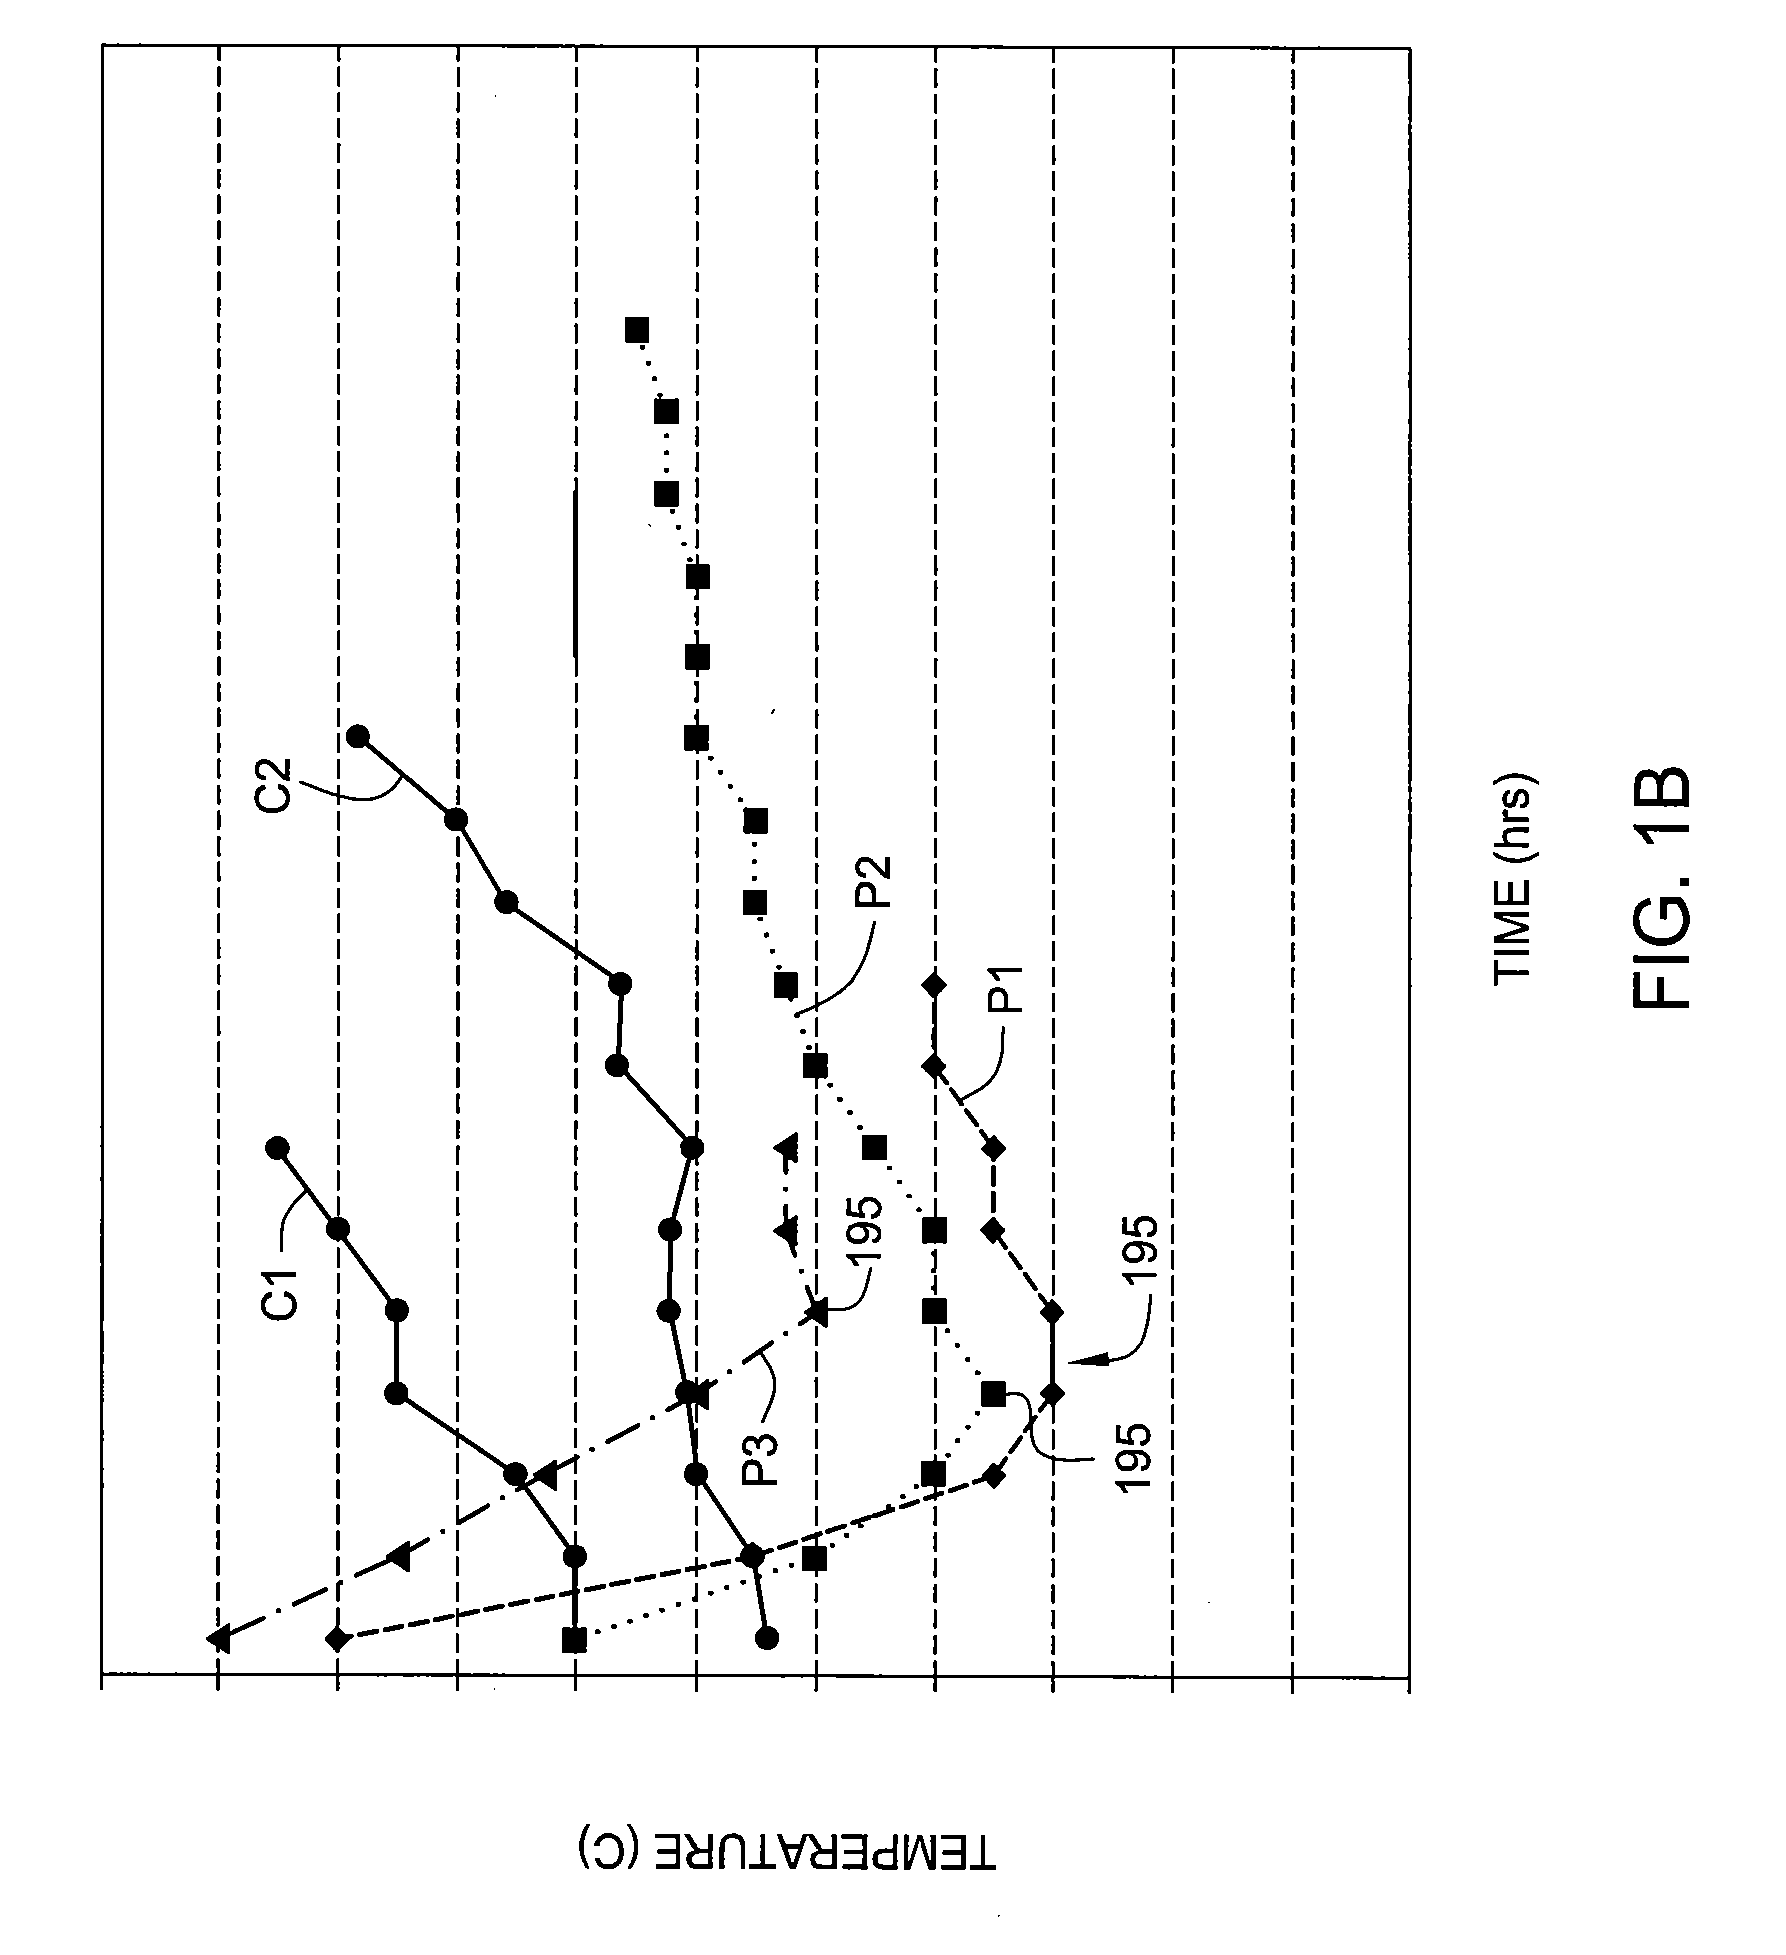 Method and apparatus for improving venous access